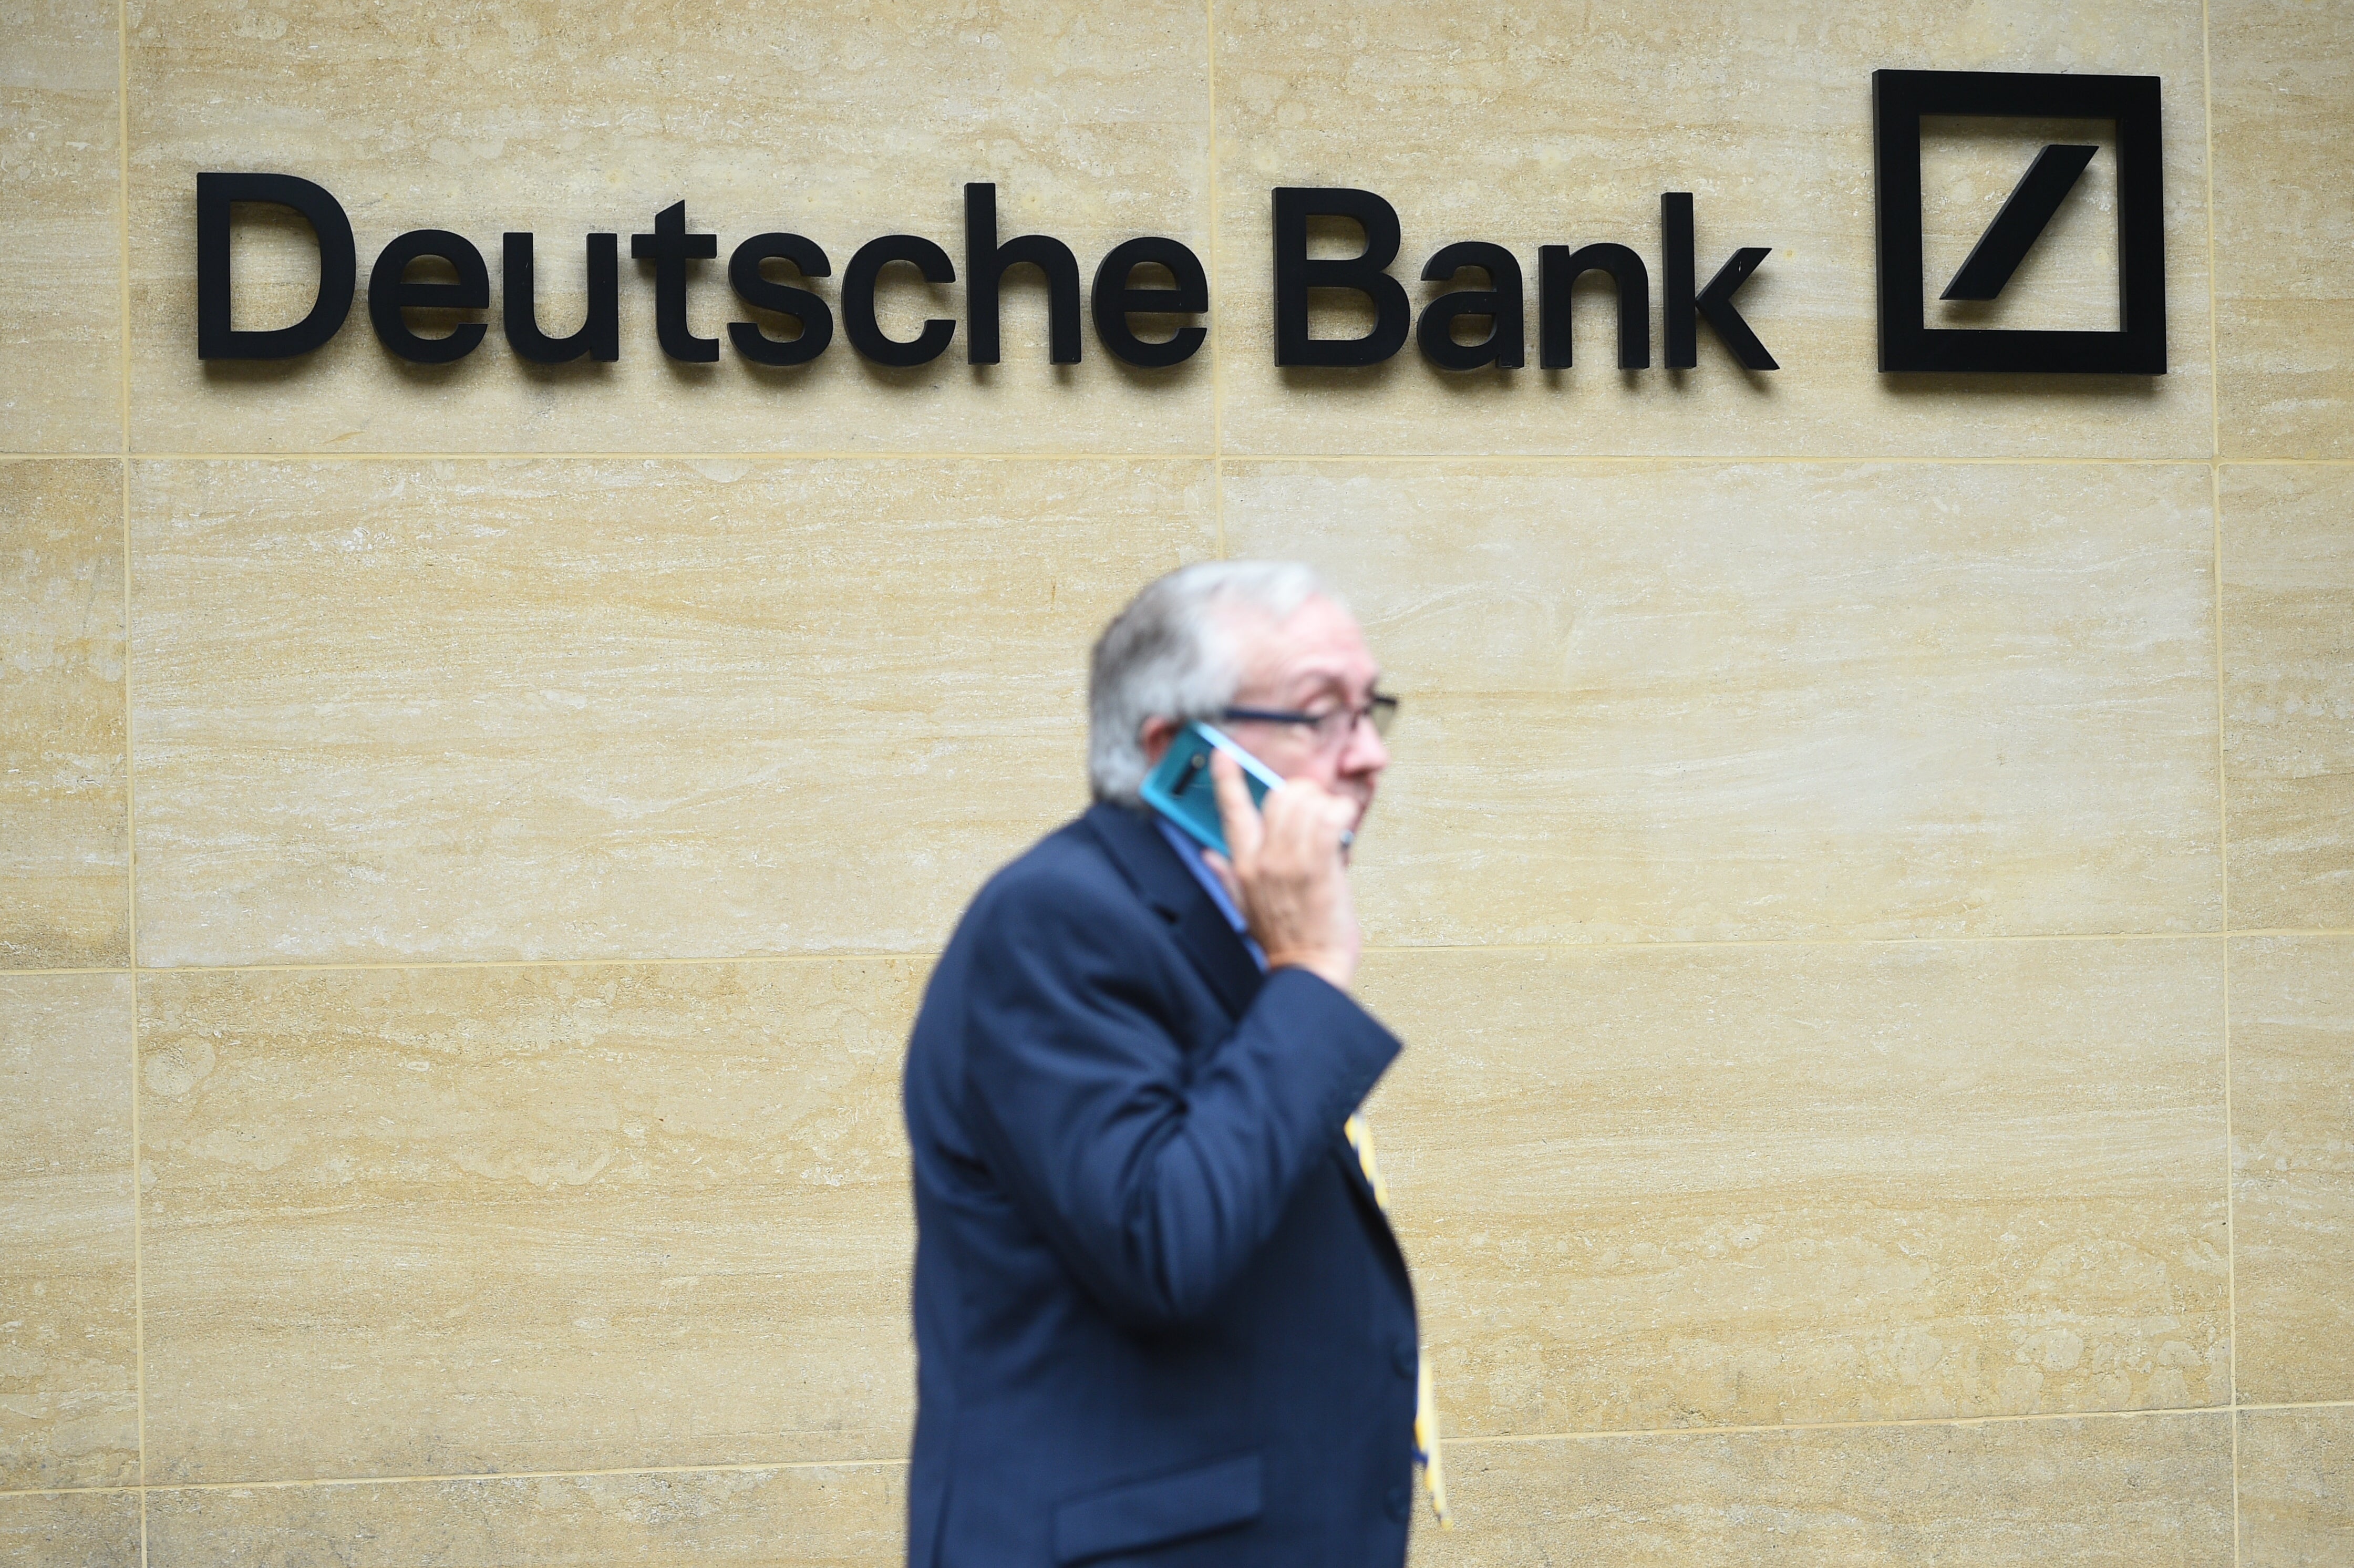 A US court has overturned the conviction of two former Deutsche Bank traders for allegedly rigging the London Interbank Offered Rate (Kirsty O’Connor/PA)